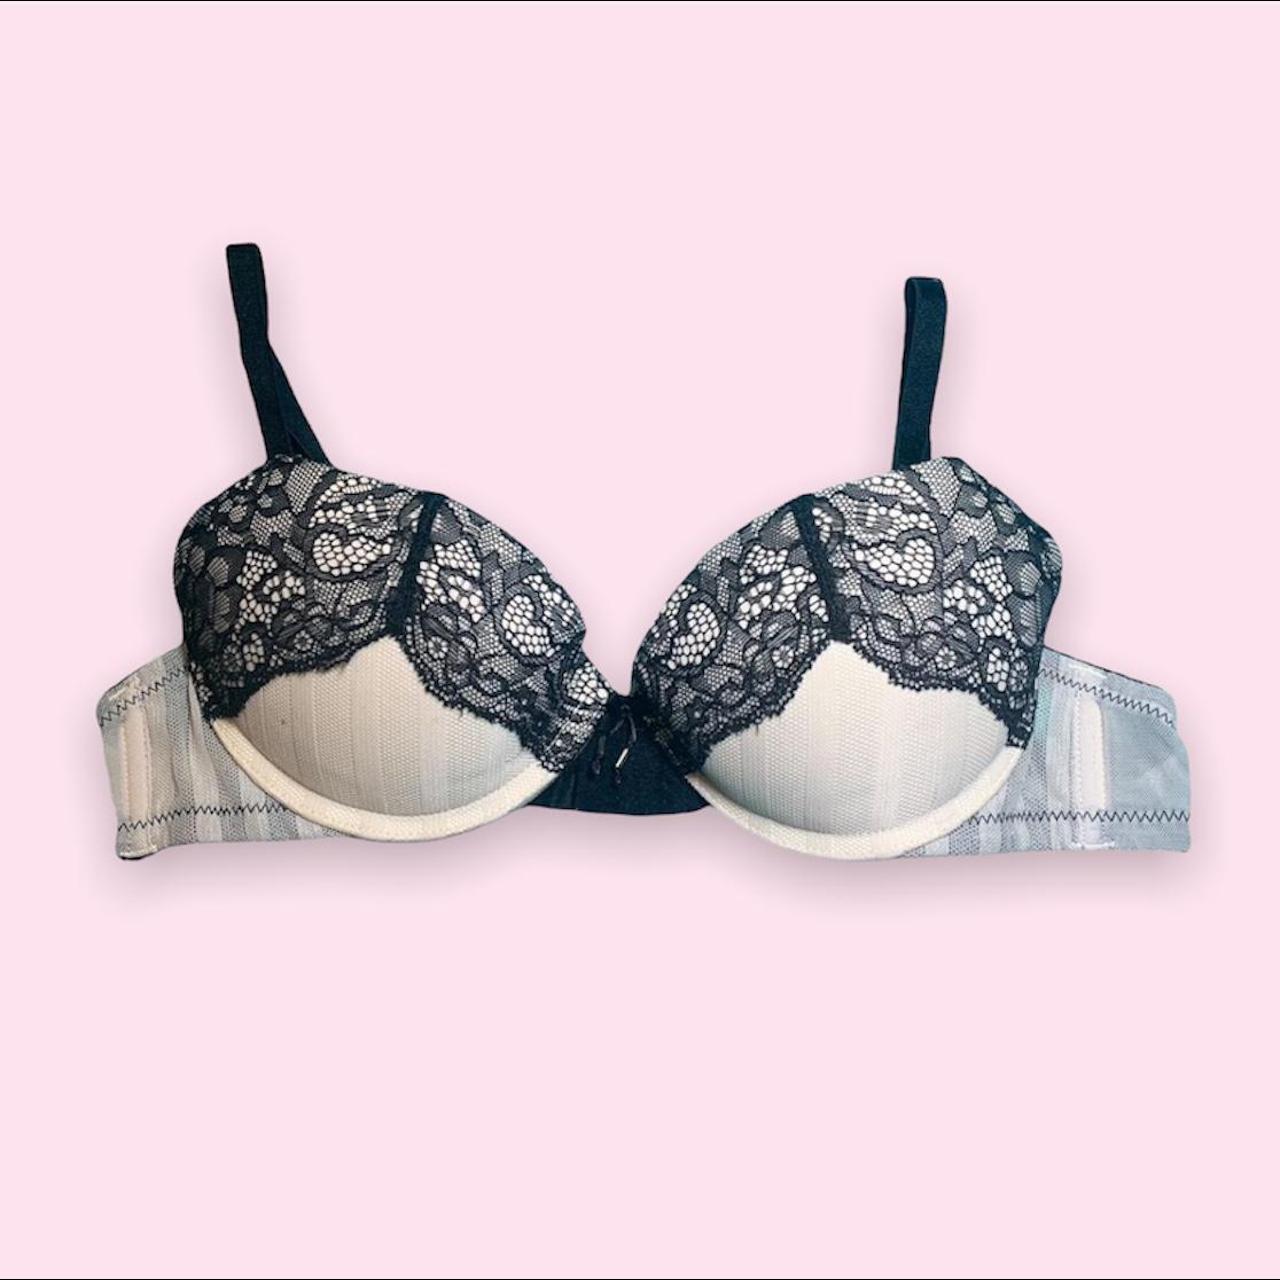 The prettiest yamamay bra with beautiful lace detail